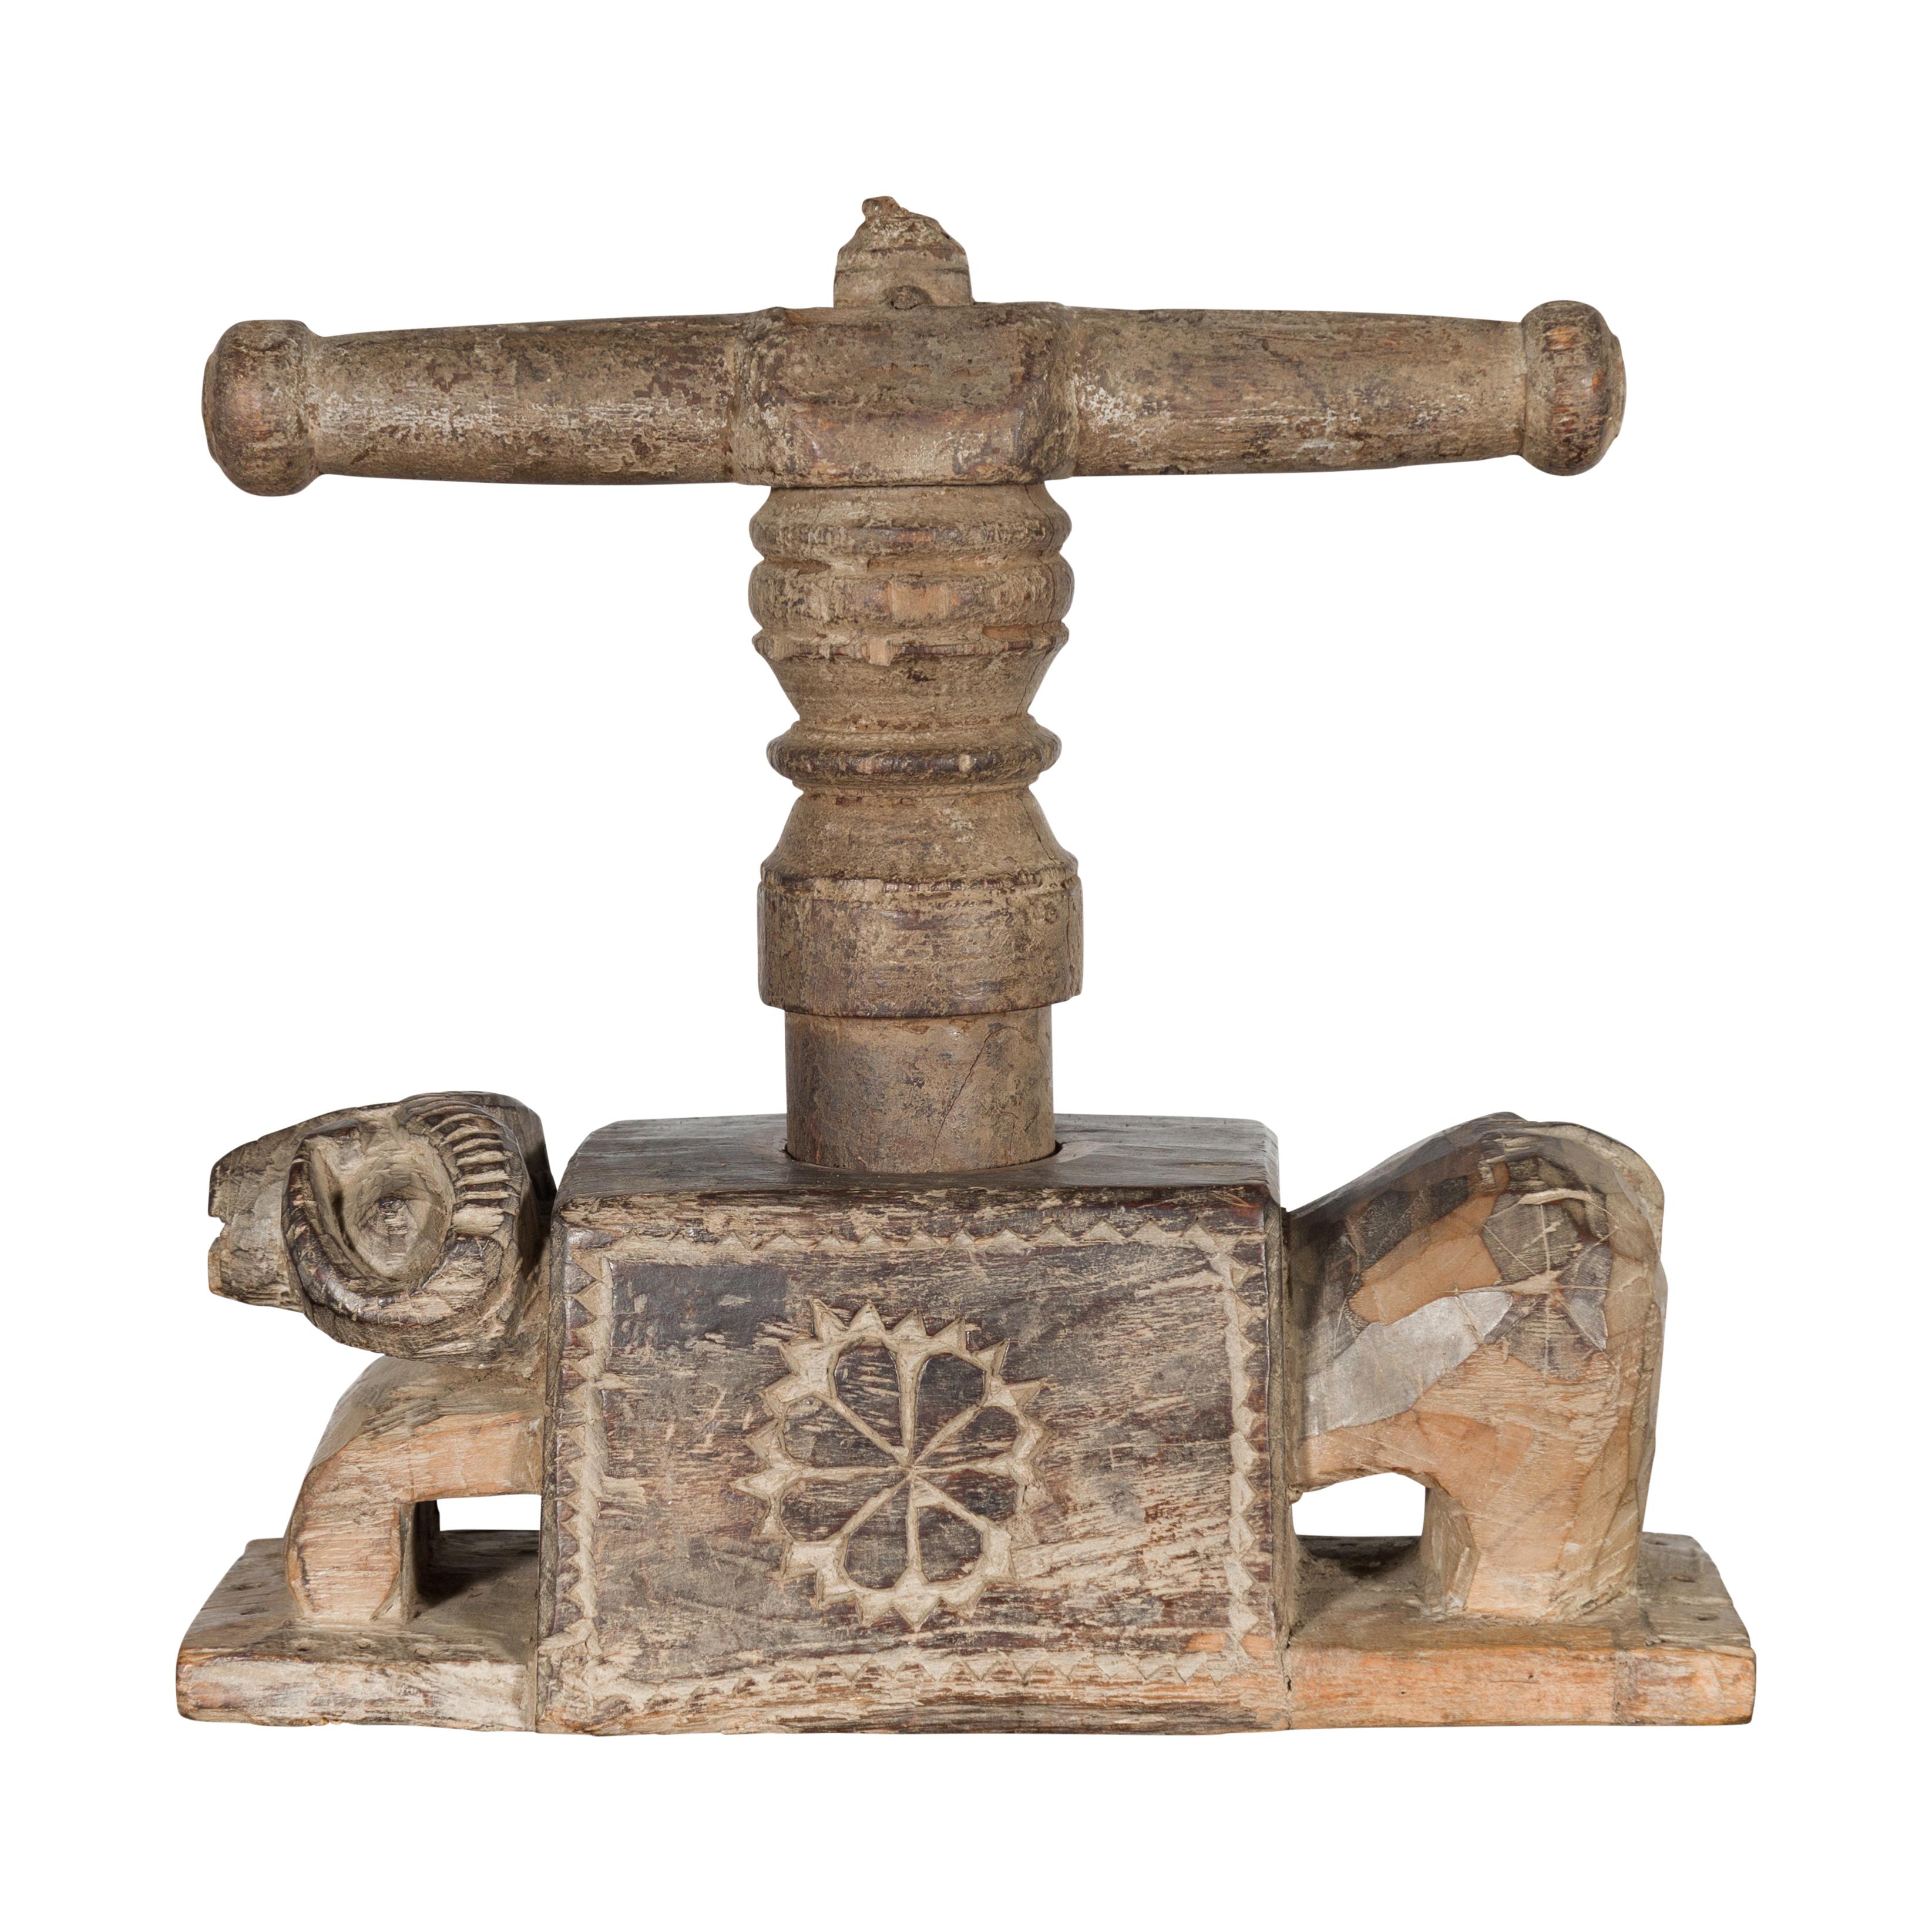 An Indian antique carved wooden hand noodle press from the 19th century, with ram motif. Created in India during the 19th century, this wooden piece was originally used to hand make noodles. Showcasing a vice press, the body is adorned with a carved